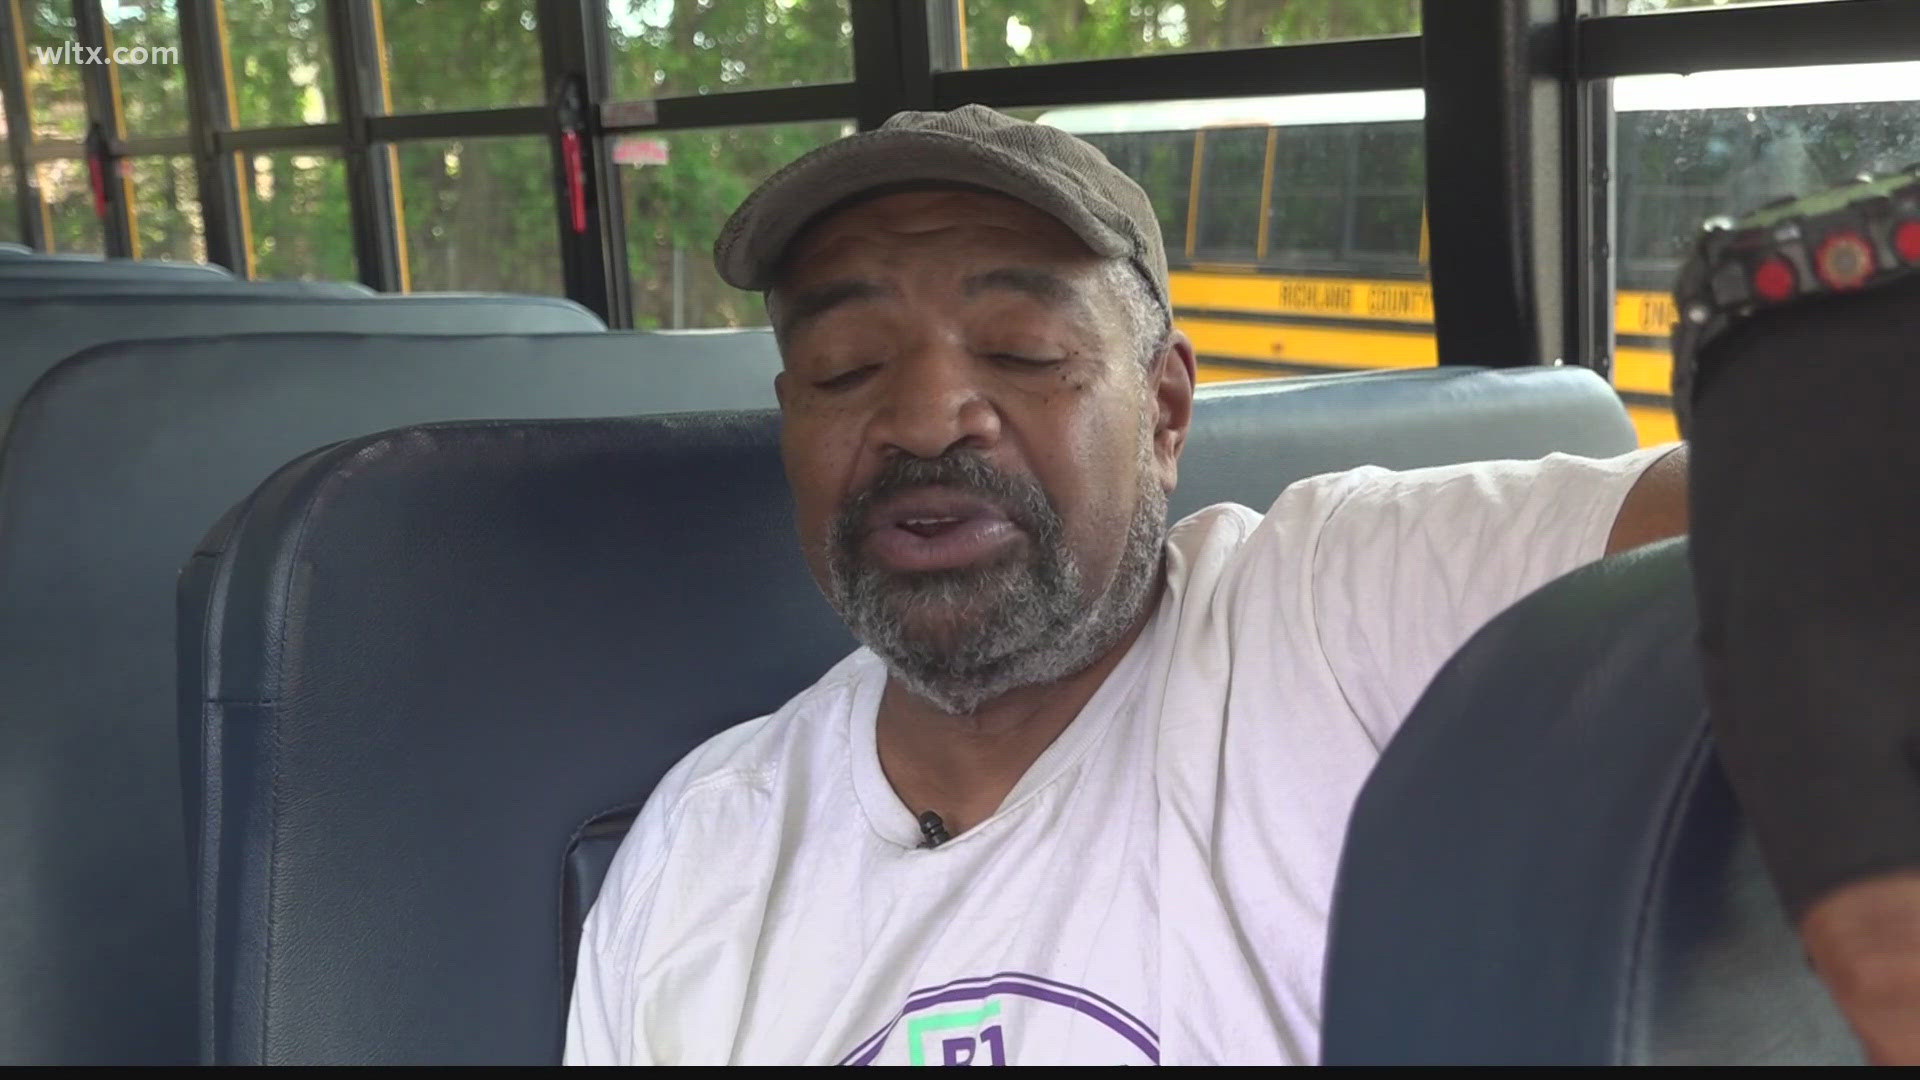 The Richland One bus driver, Blease Brown, is stepping out from behind the wheel after driving students to school for over 40 years.